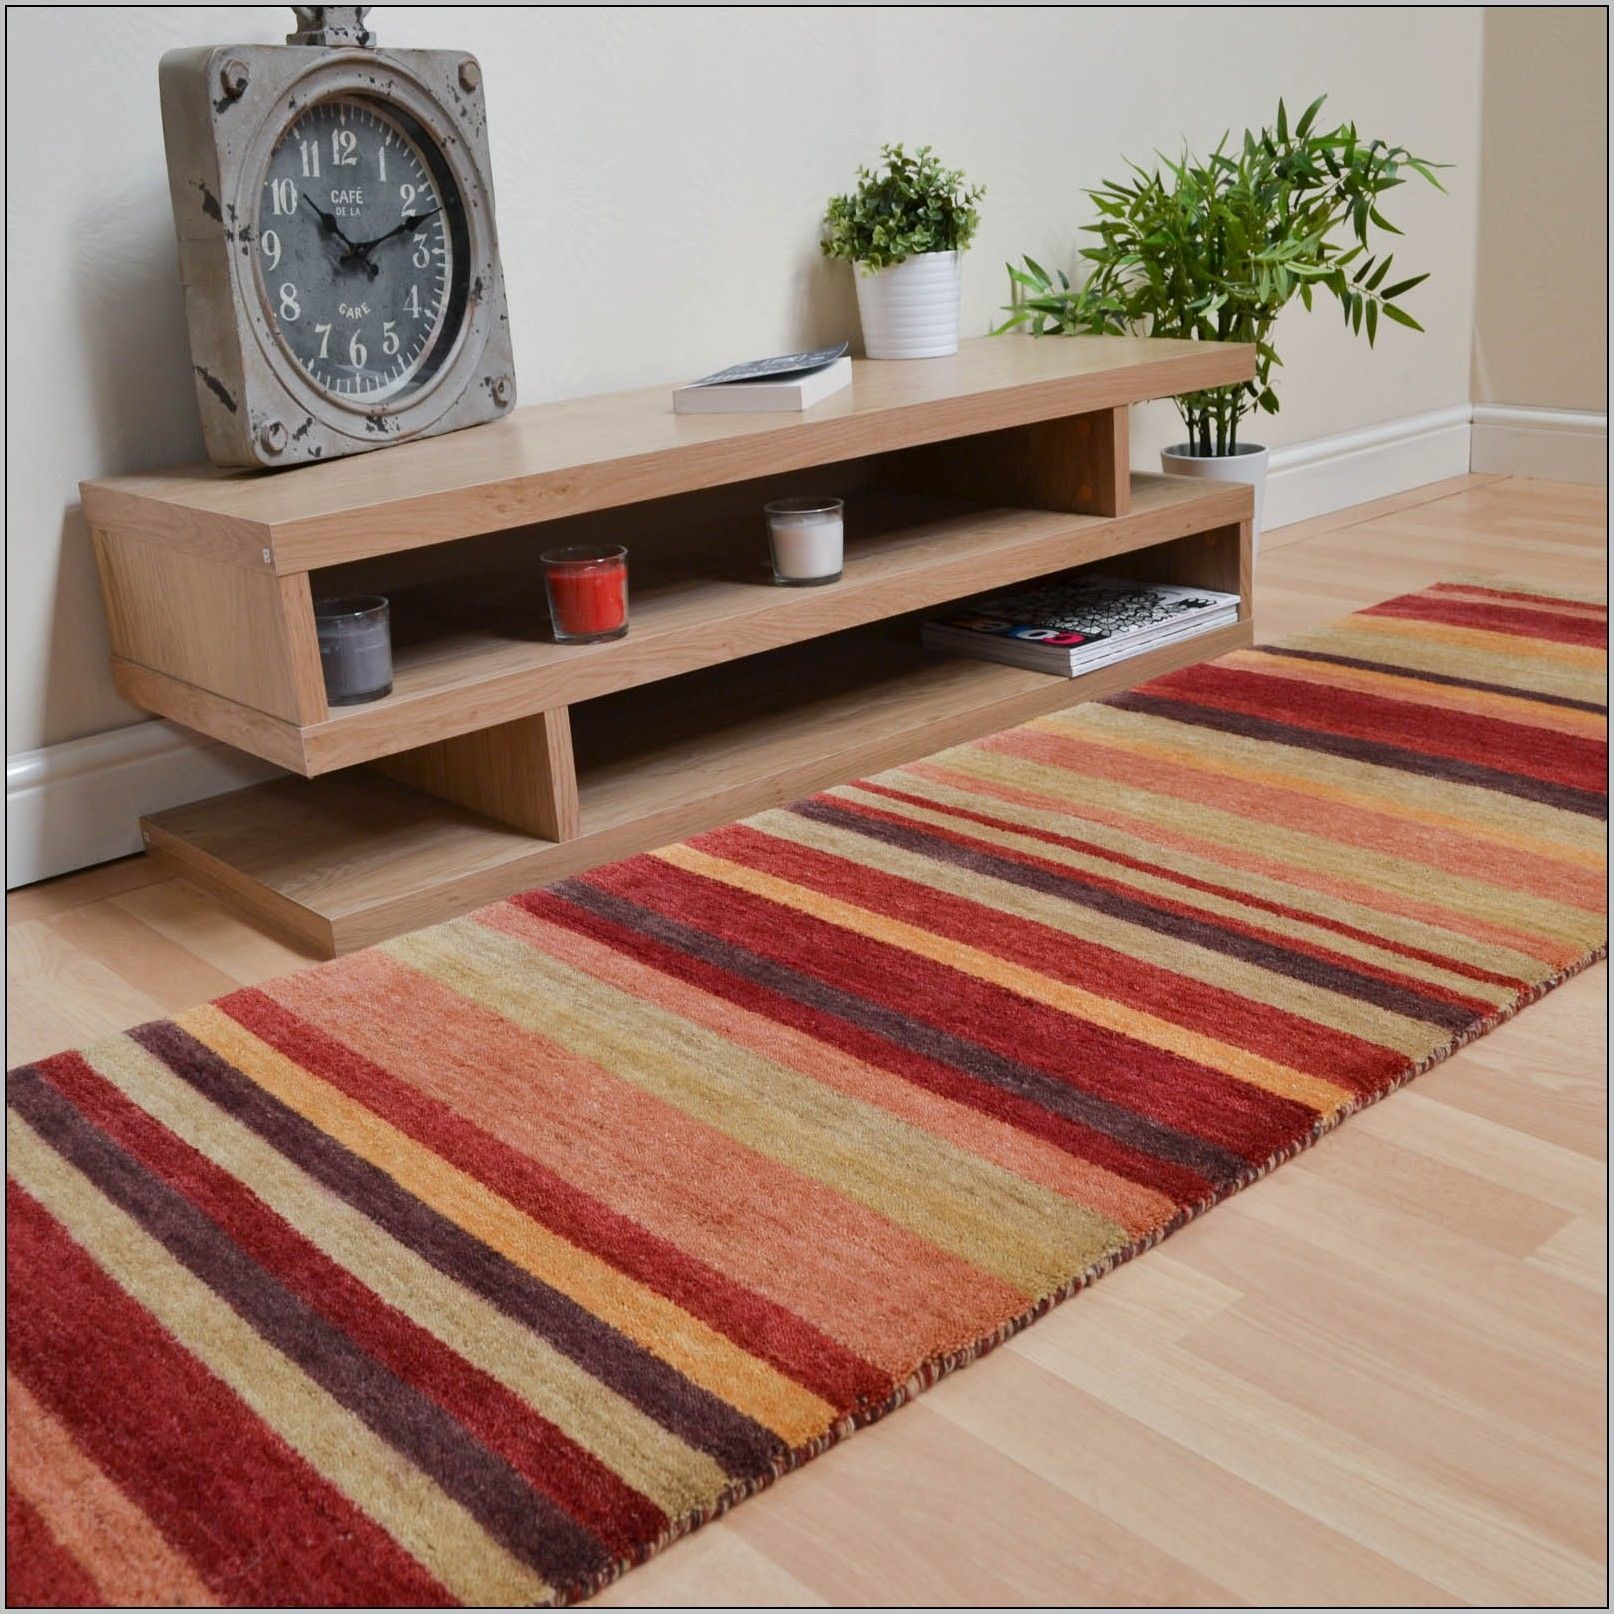 Area Rugs Awesome Runner Rugs Walmart Home Depot Rug Runners In Hallway Runners At Walmart 